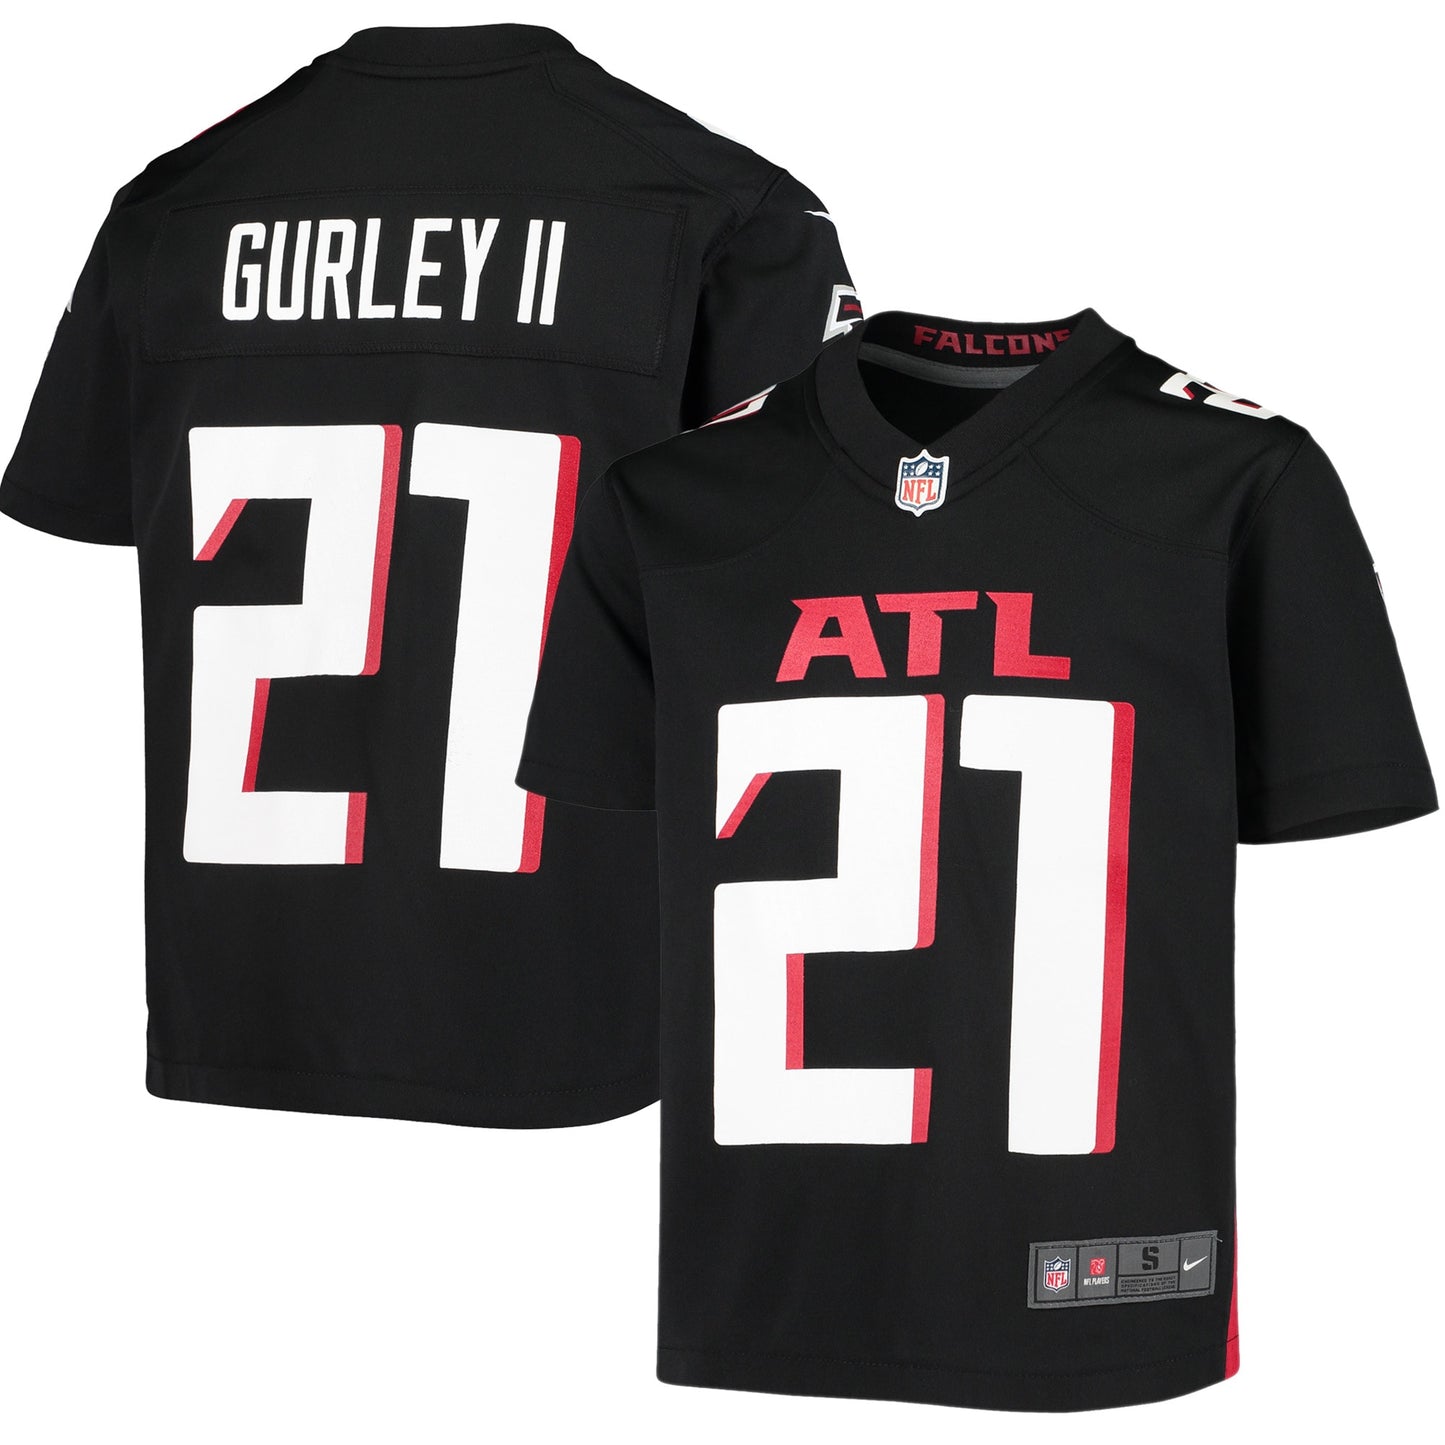 Todd Gurley II Atlanta Falcons Nike Youth Player Game Jersey - Black